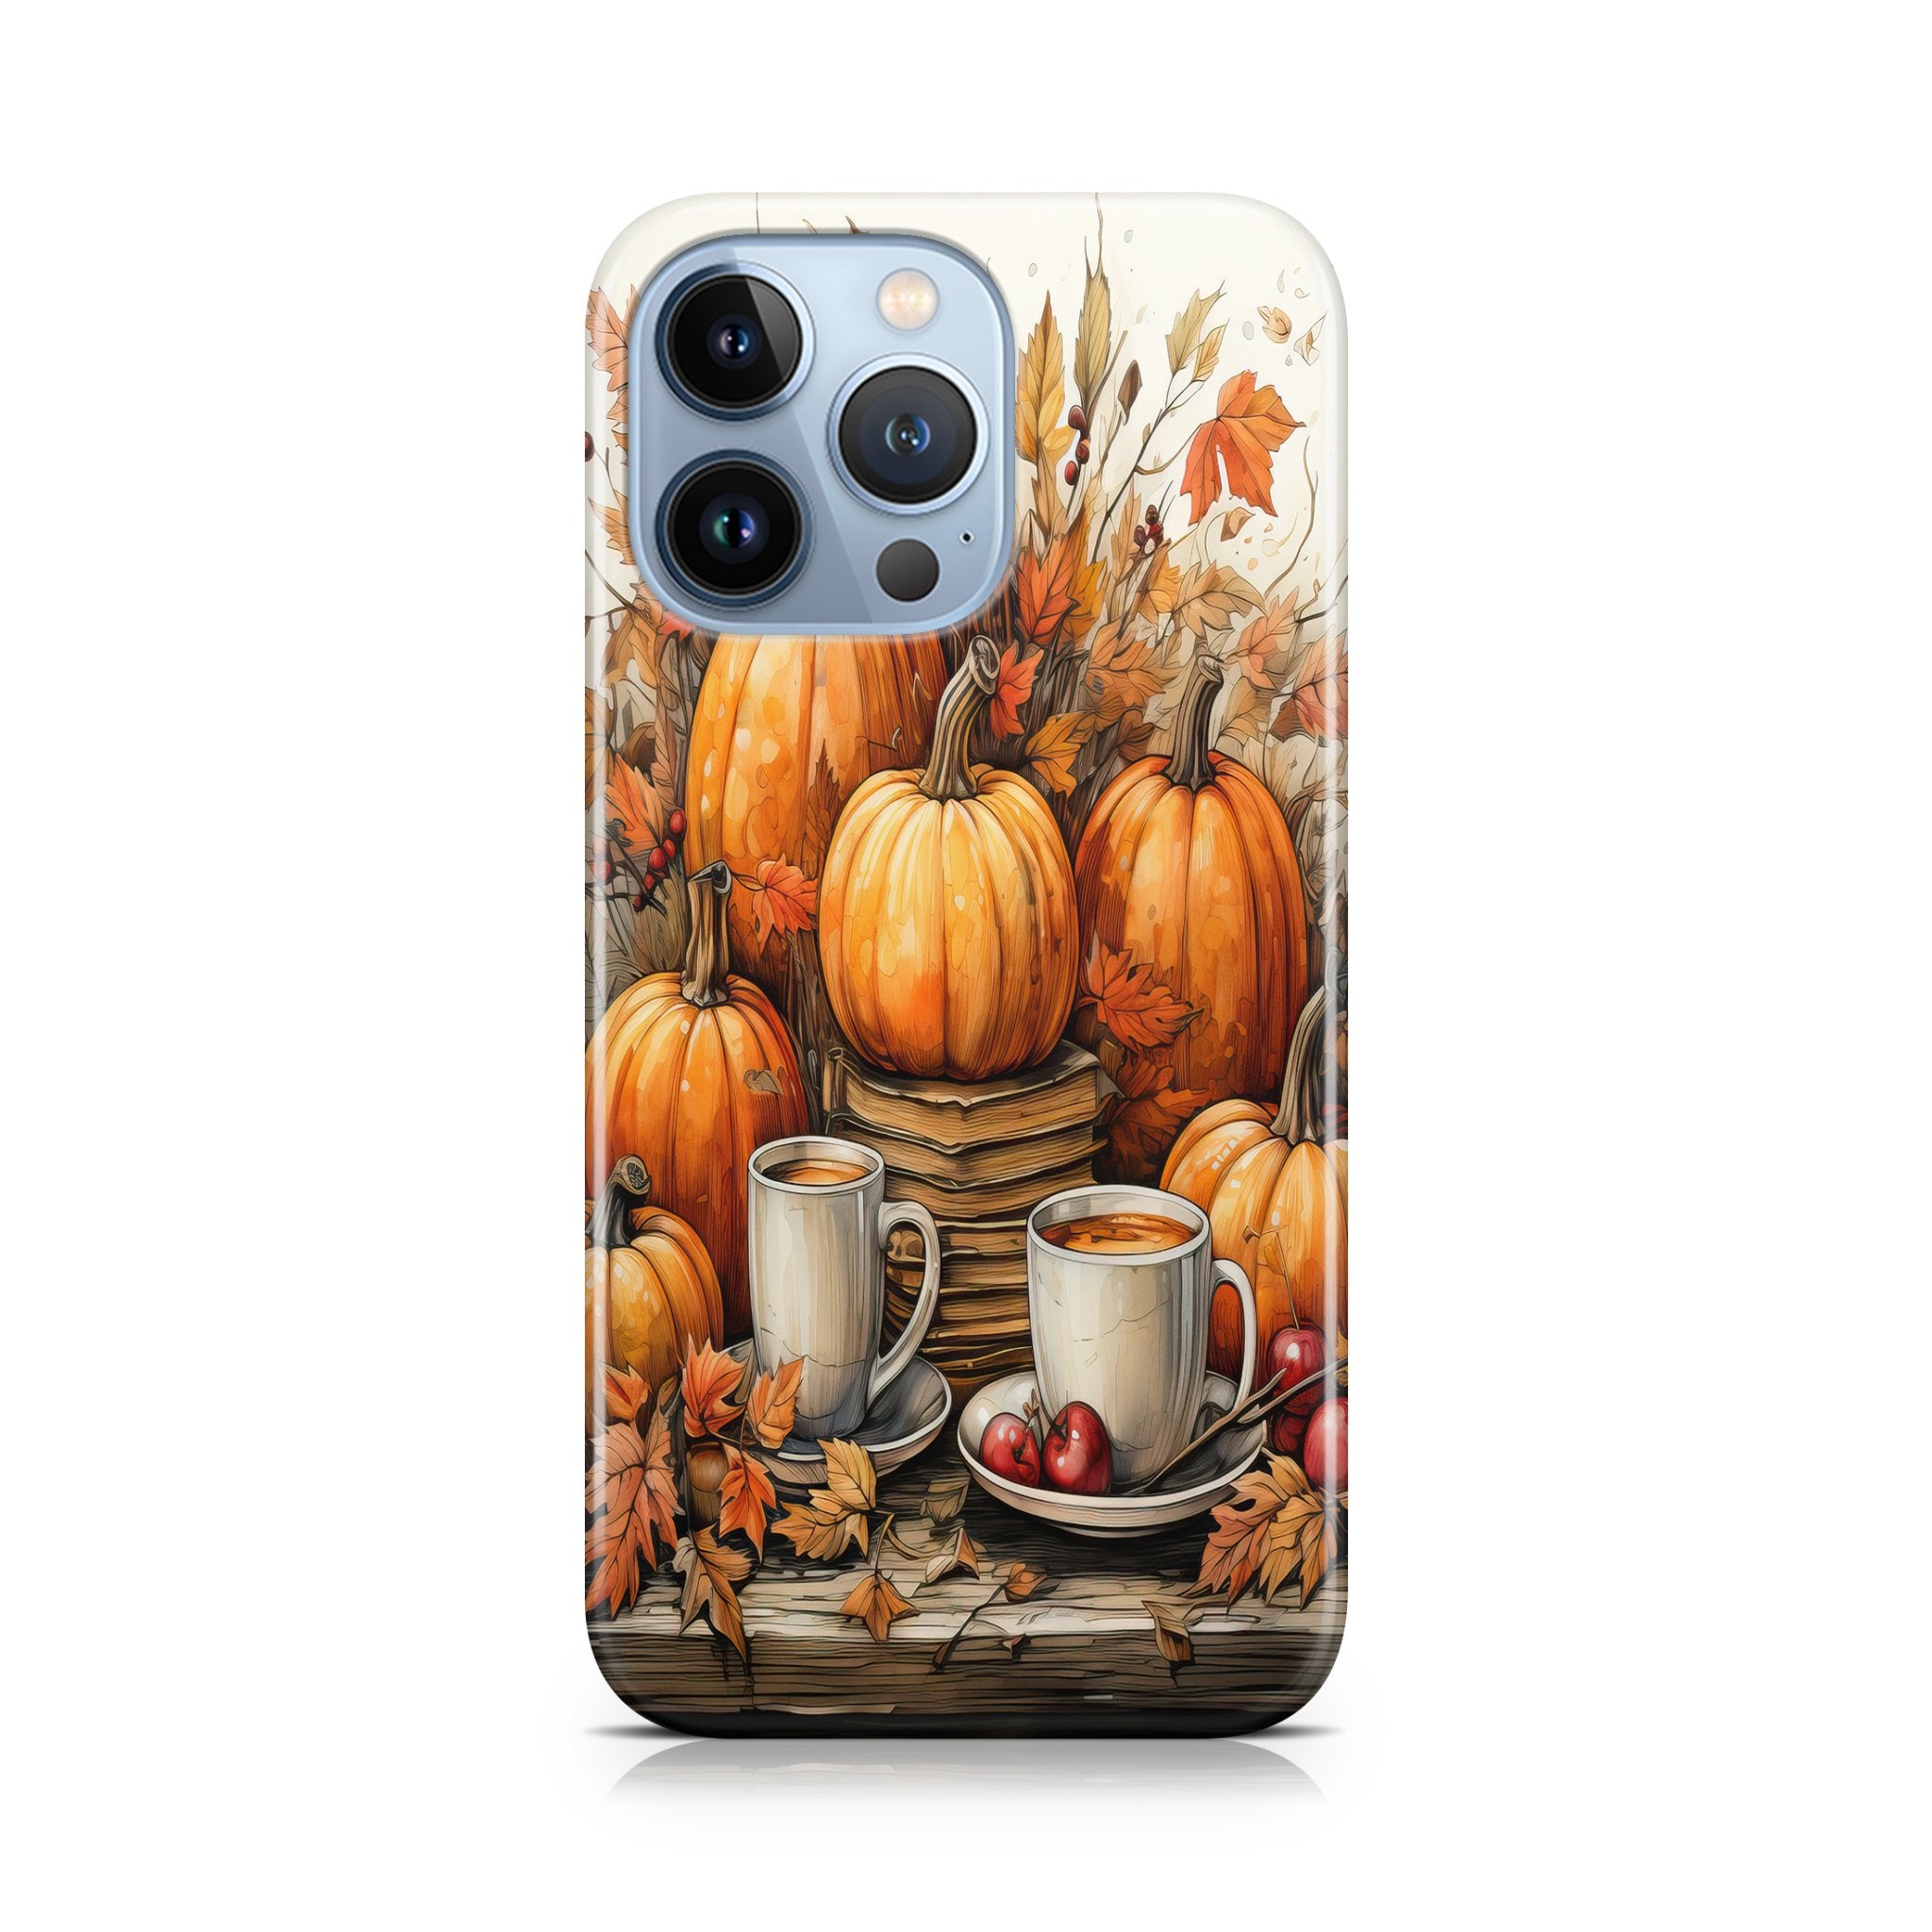 Harvest Pumpkin - iPhone phone case designs by CaseSwagger